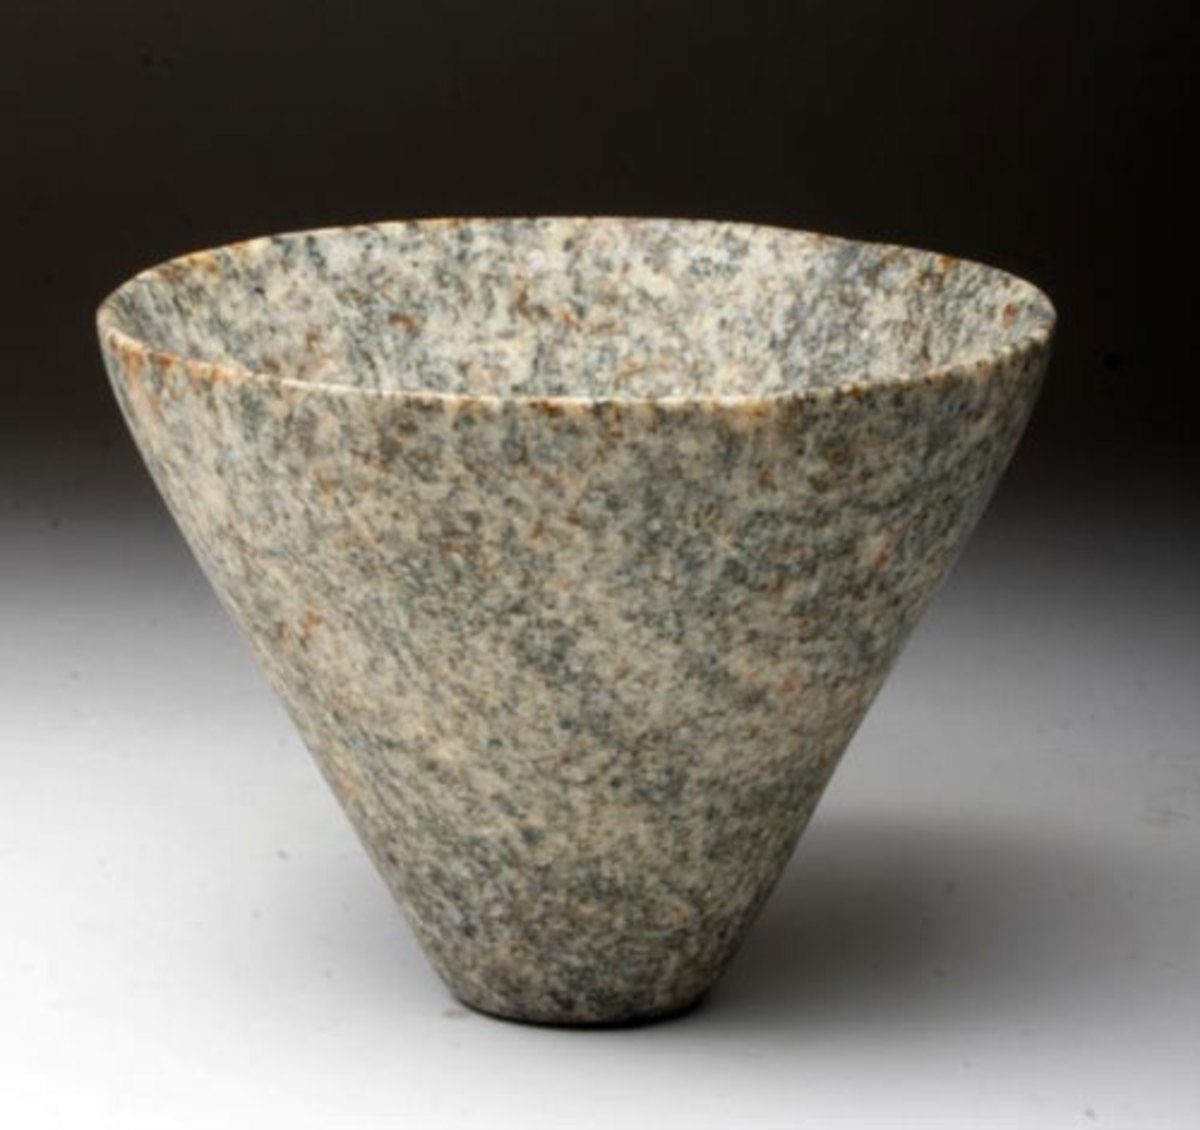 conical offering bowl